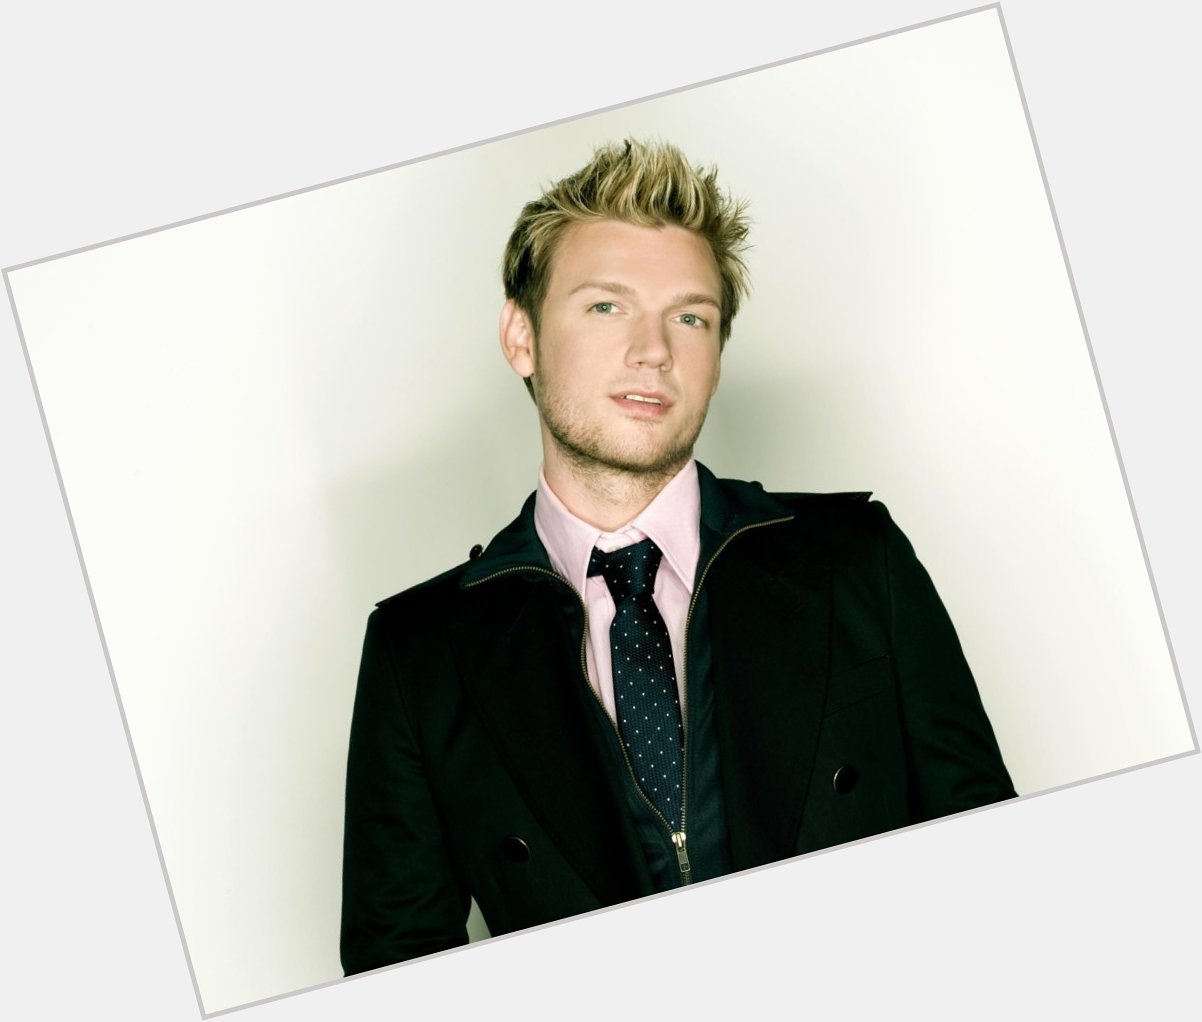 Born on this day in 1980 in Jamestown, NY, singer Nick Carter Happy 37th birthday ! 